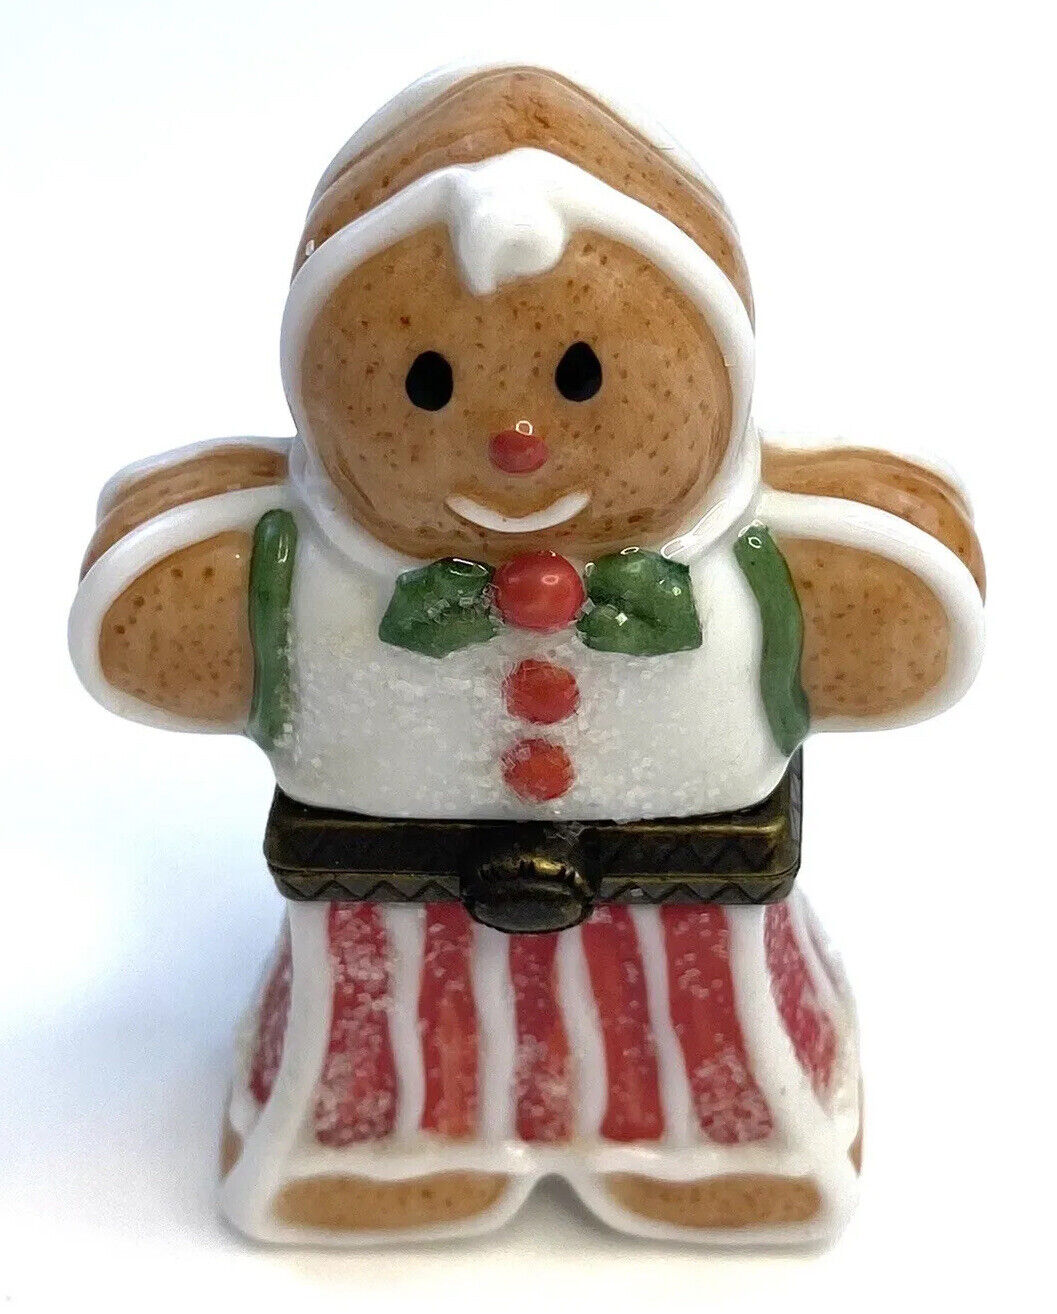 PHB Porcelain Hinged Trinket Box Midwest Cannon Falls Gingerbread Man Christmas